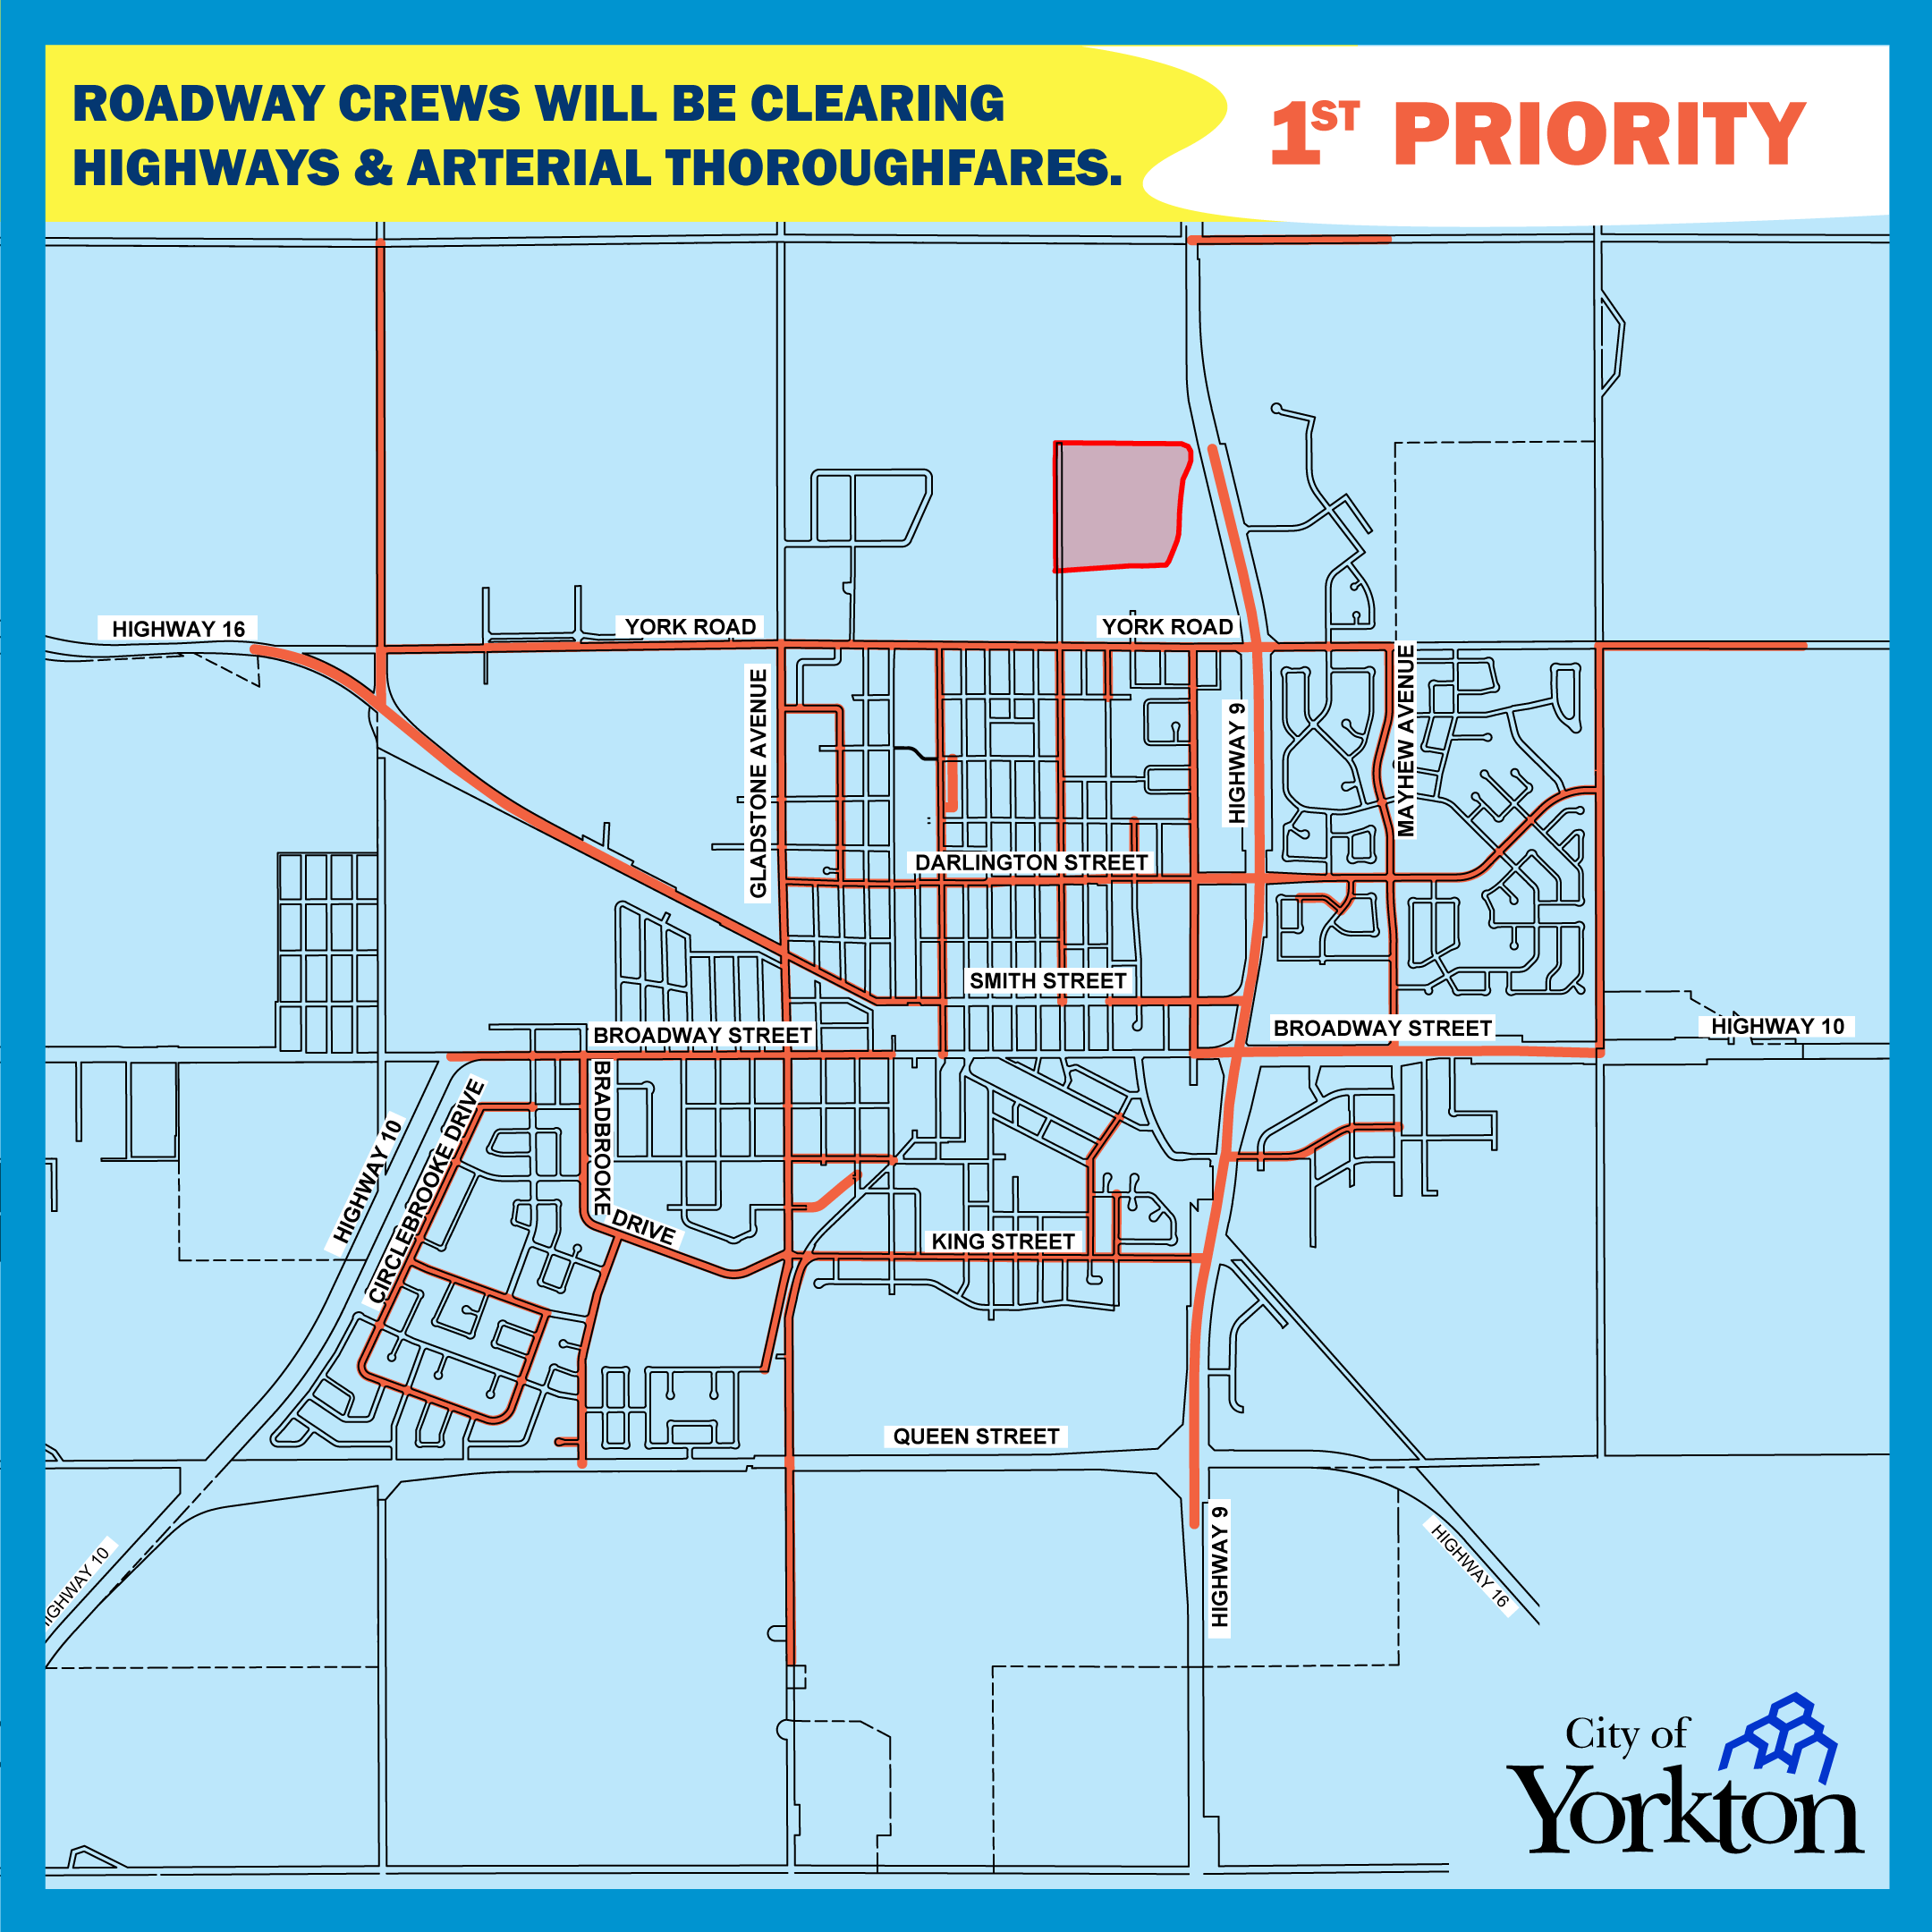 1st-priority-streets